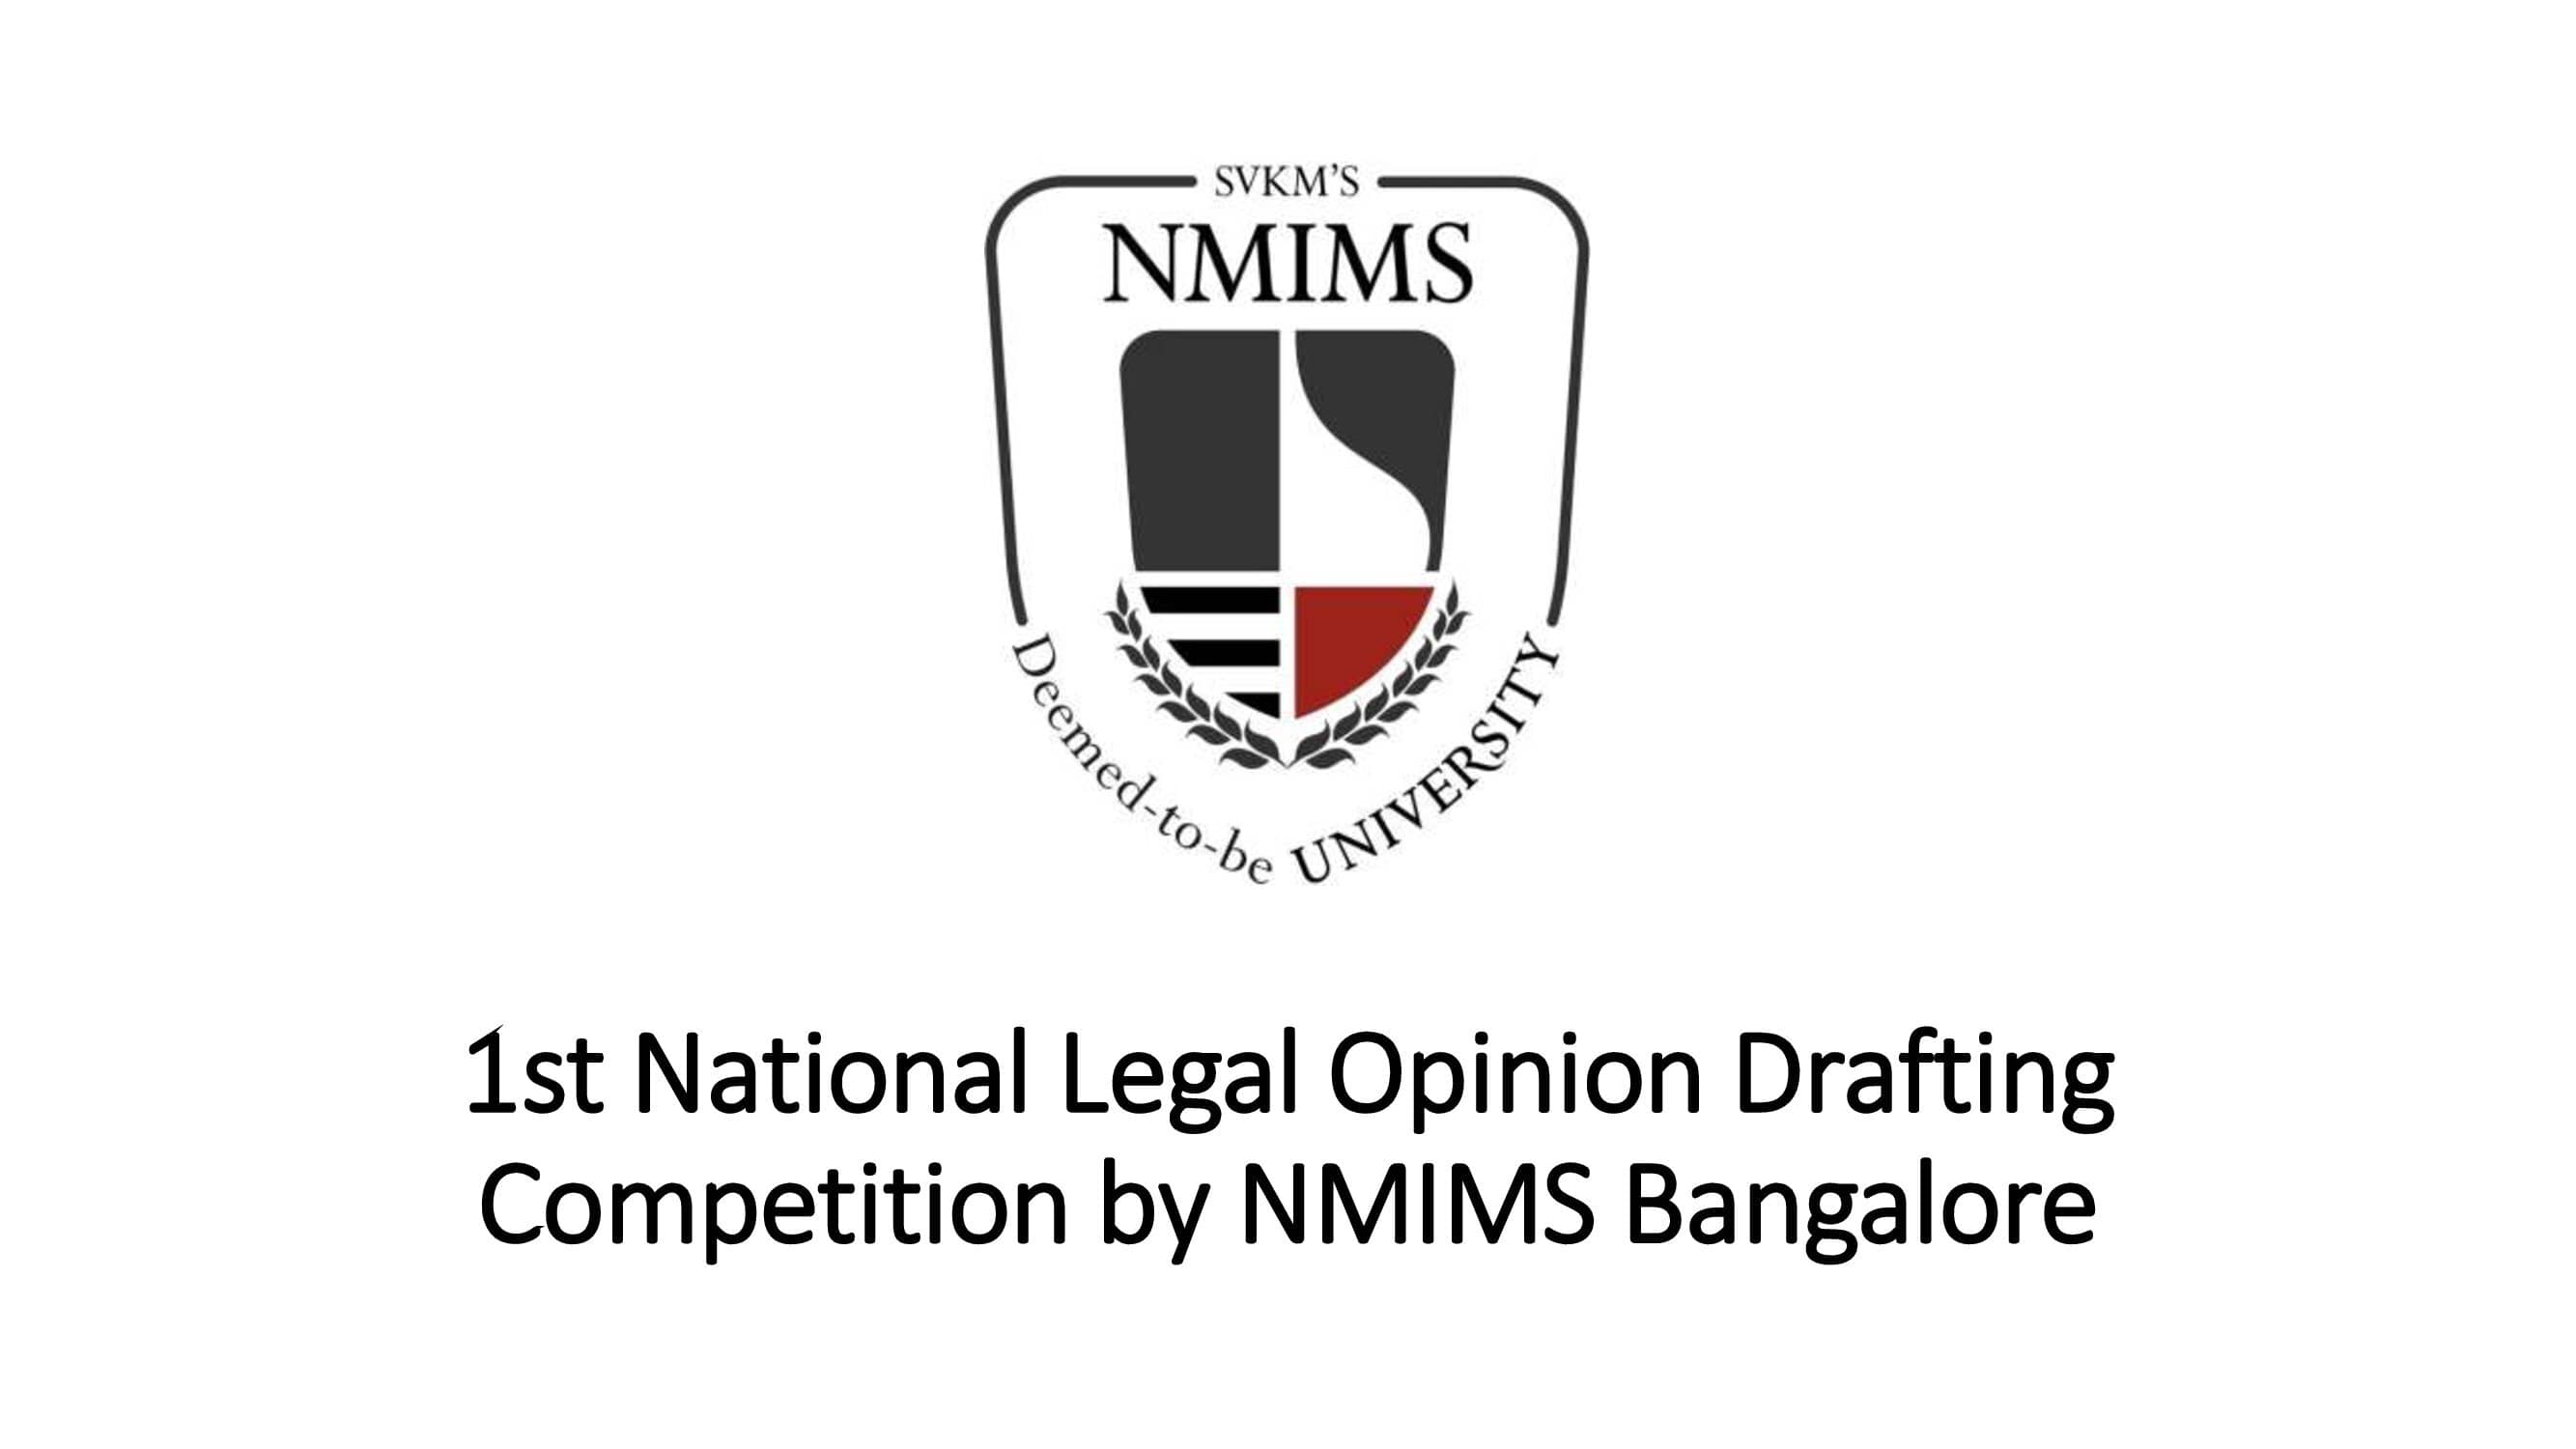 1st National Legal Opinion Drafting Competition by NMIMS Bangalore